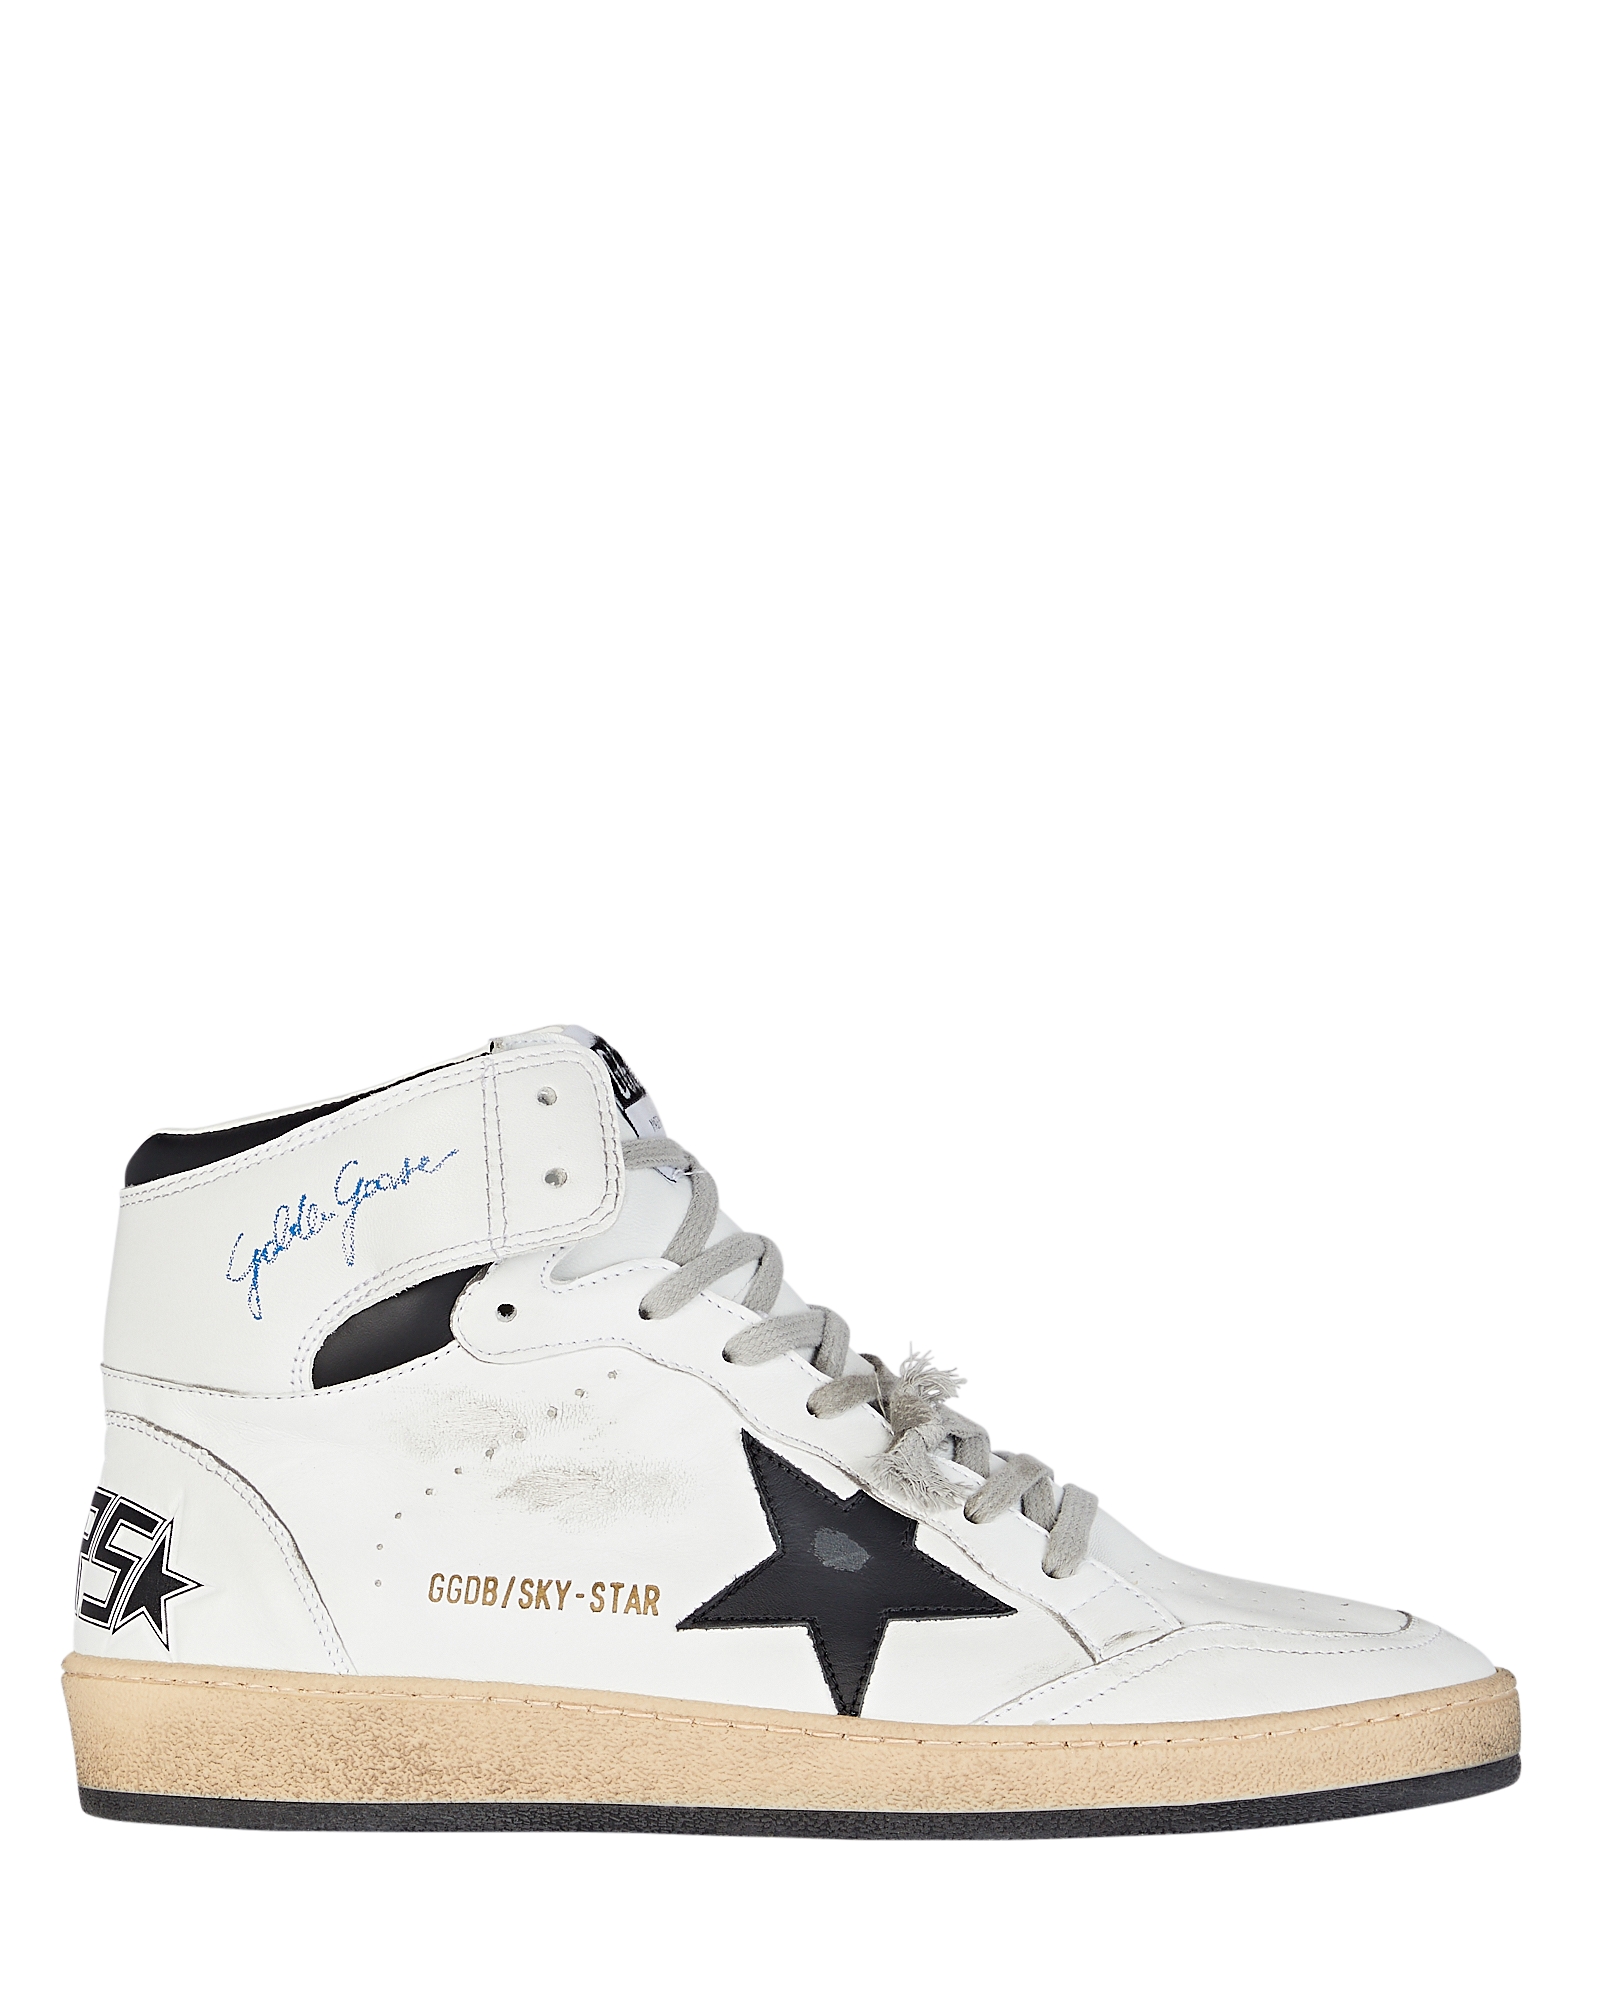 Golden Goose Sky Star Leather High-Top Sneakers in White | INTERMIX®